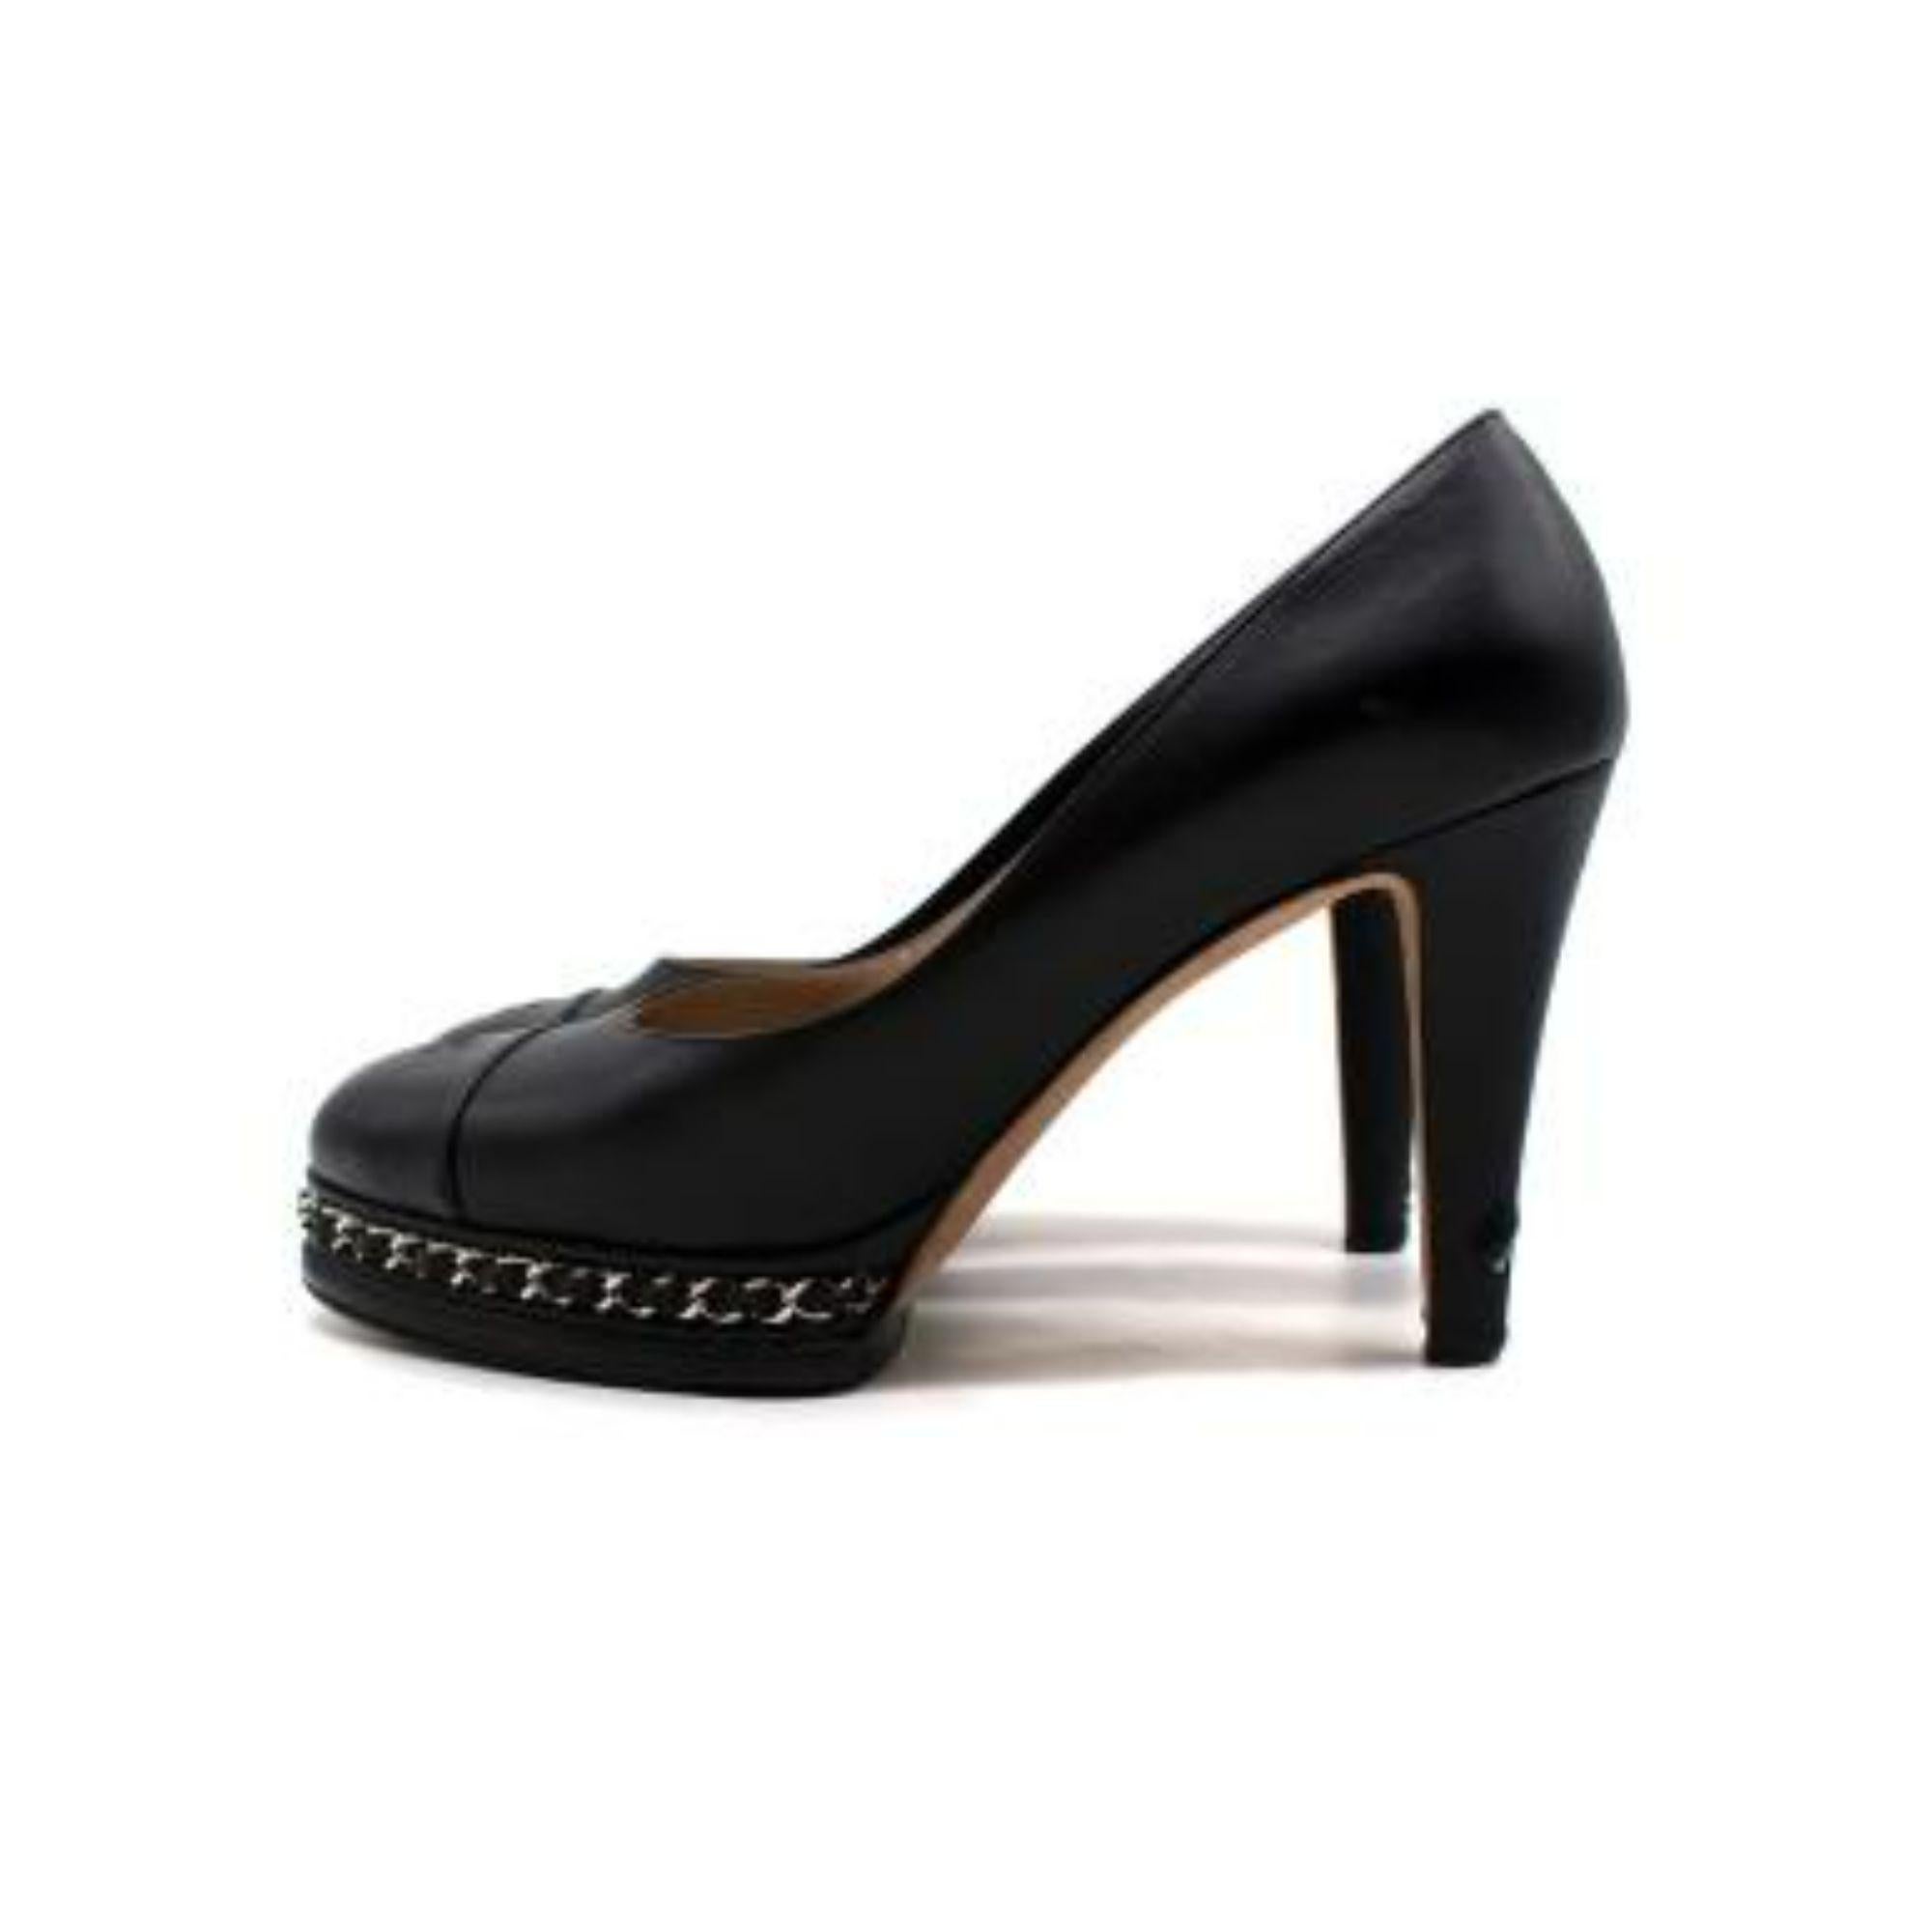 Chanel Black Chain Trimmed CC Pumps In Good Condition For Sale In London, GB